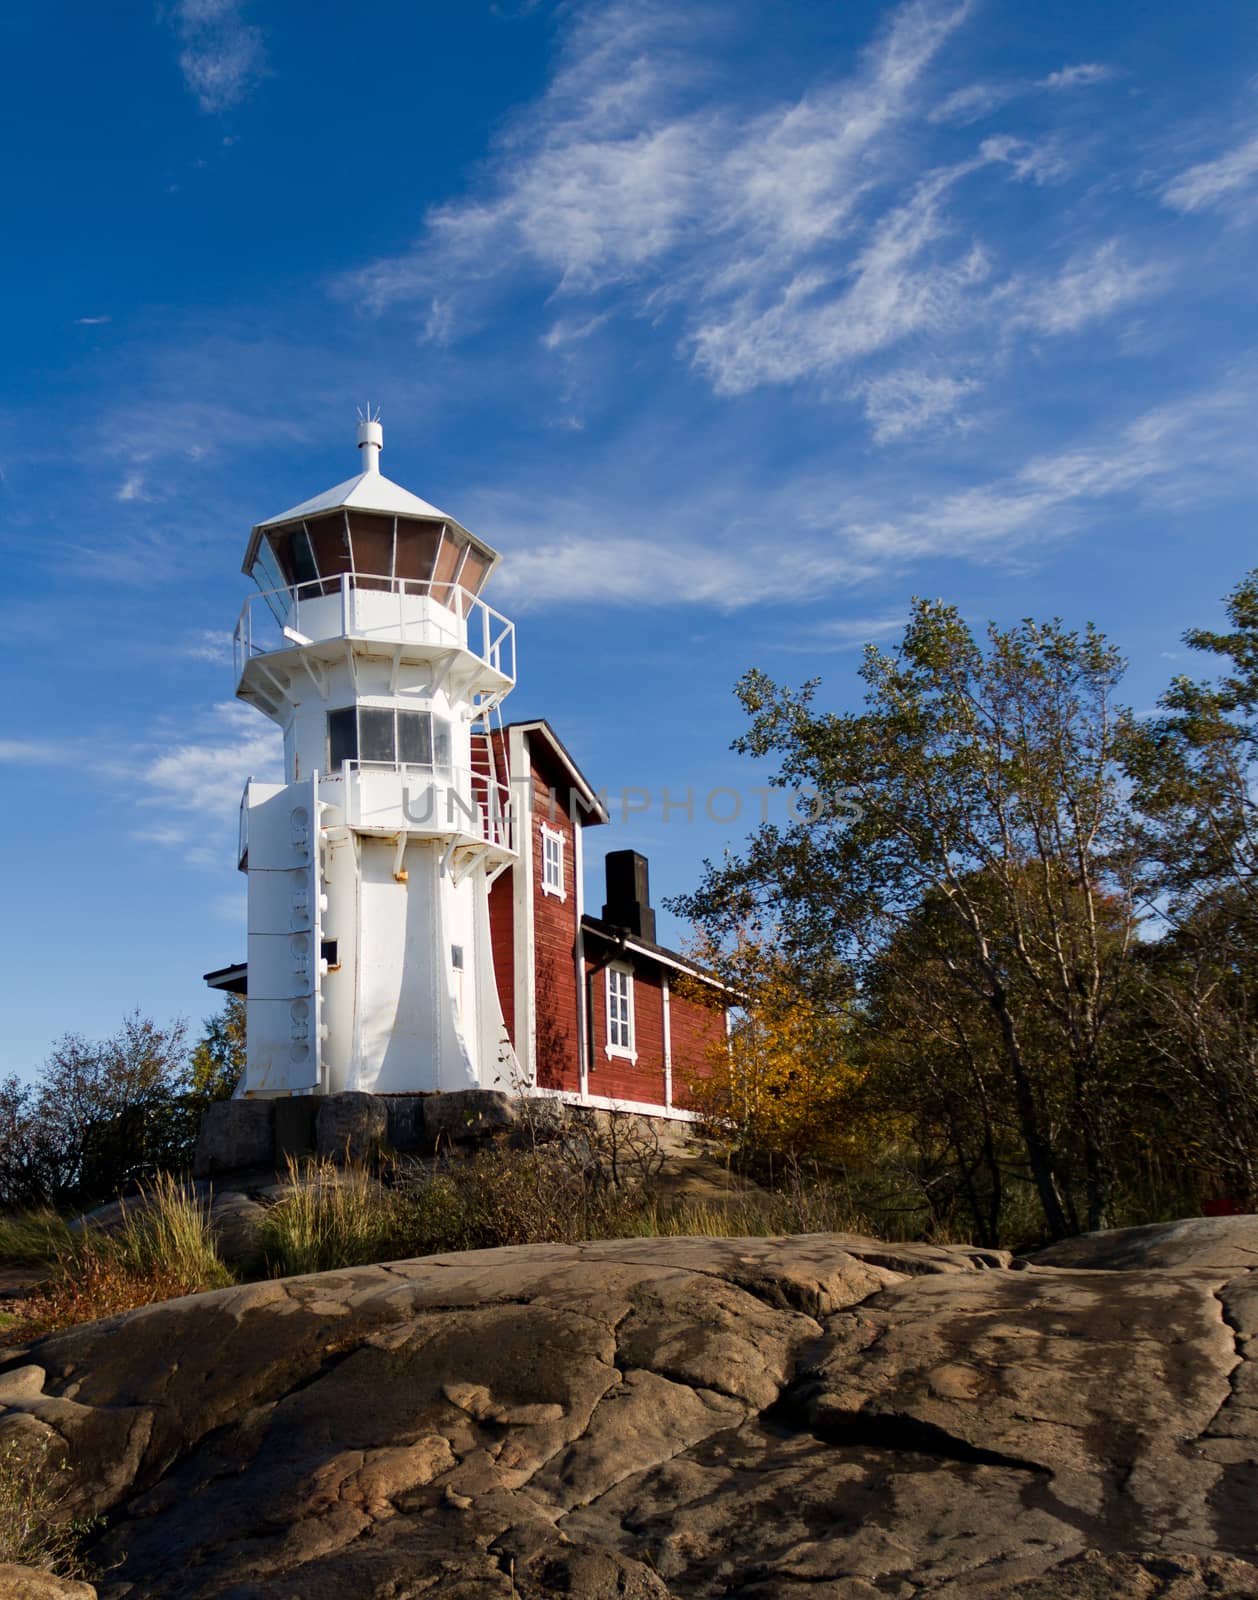 Old lighthouse in Pori, Finland by leorantala